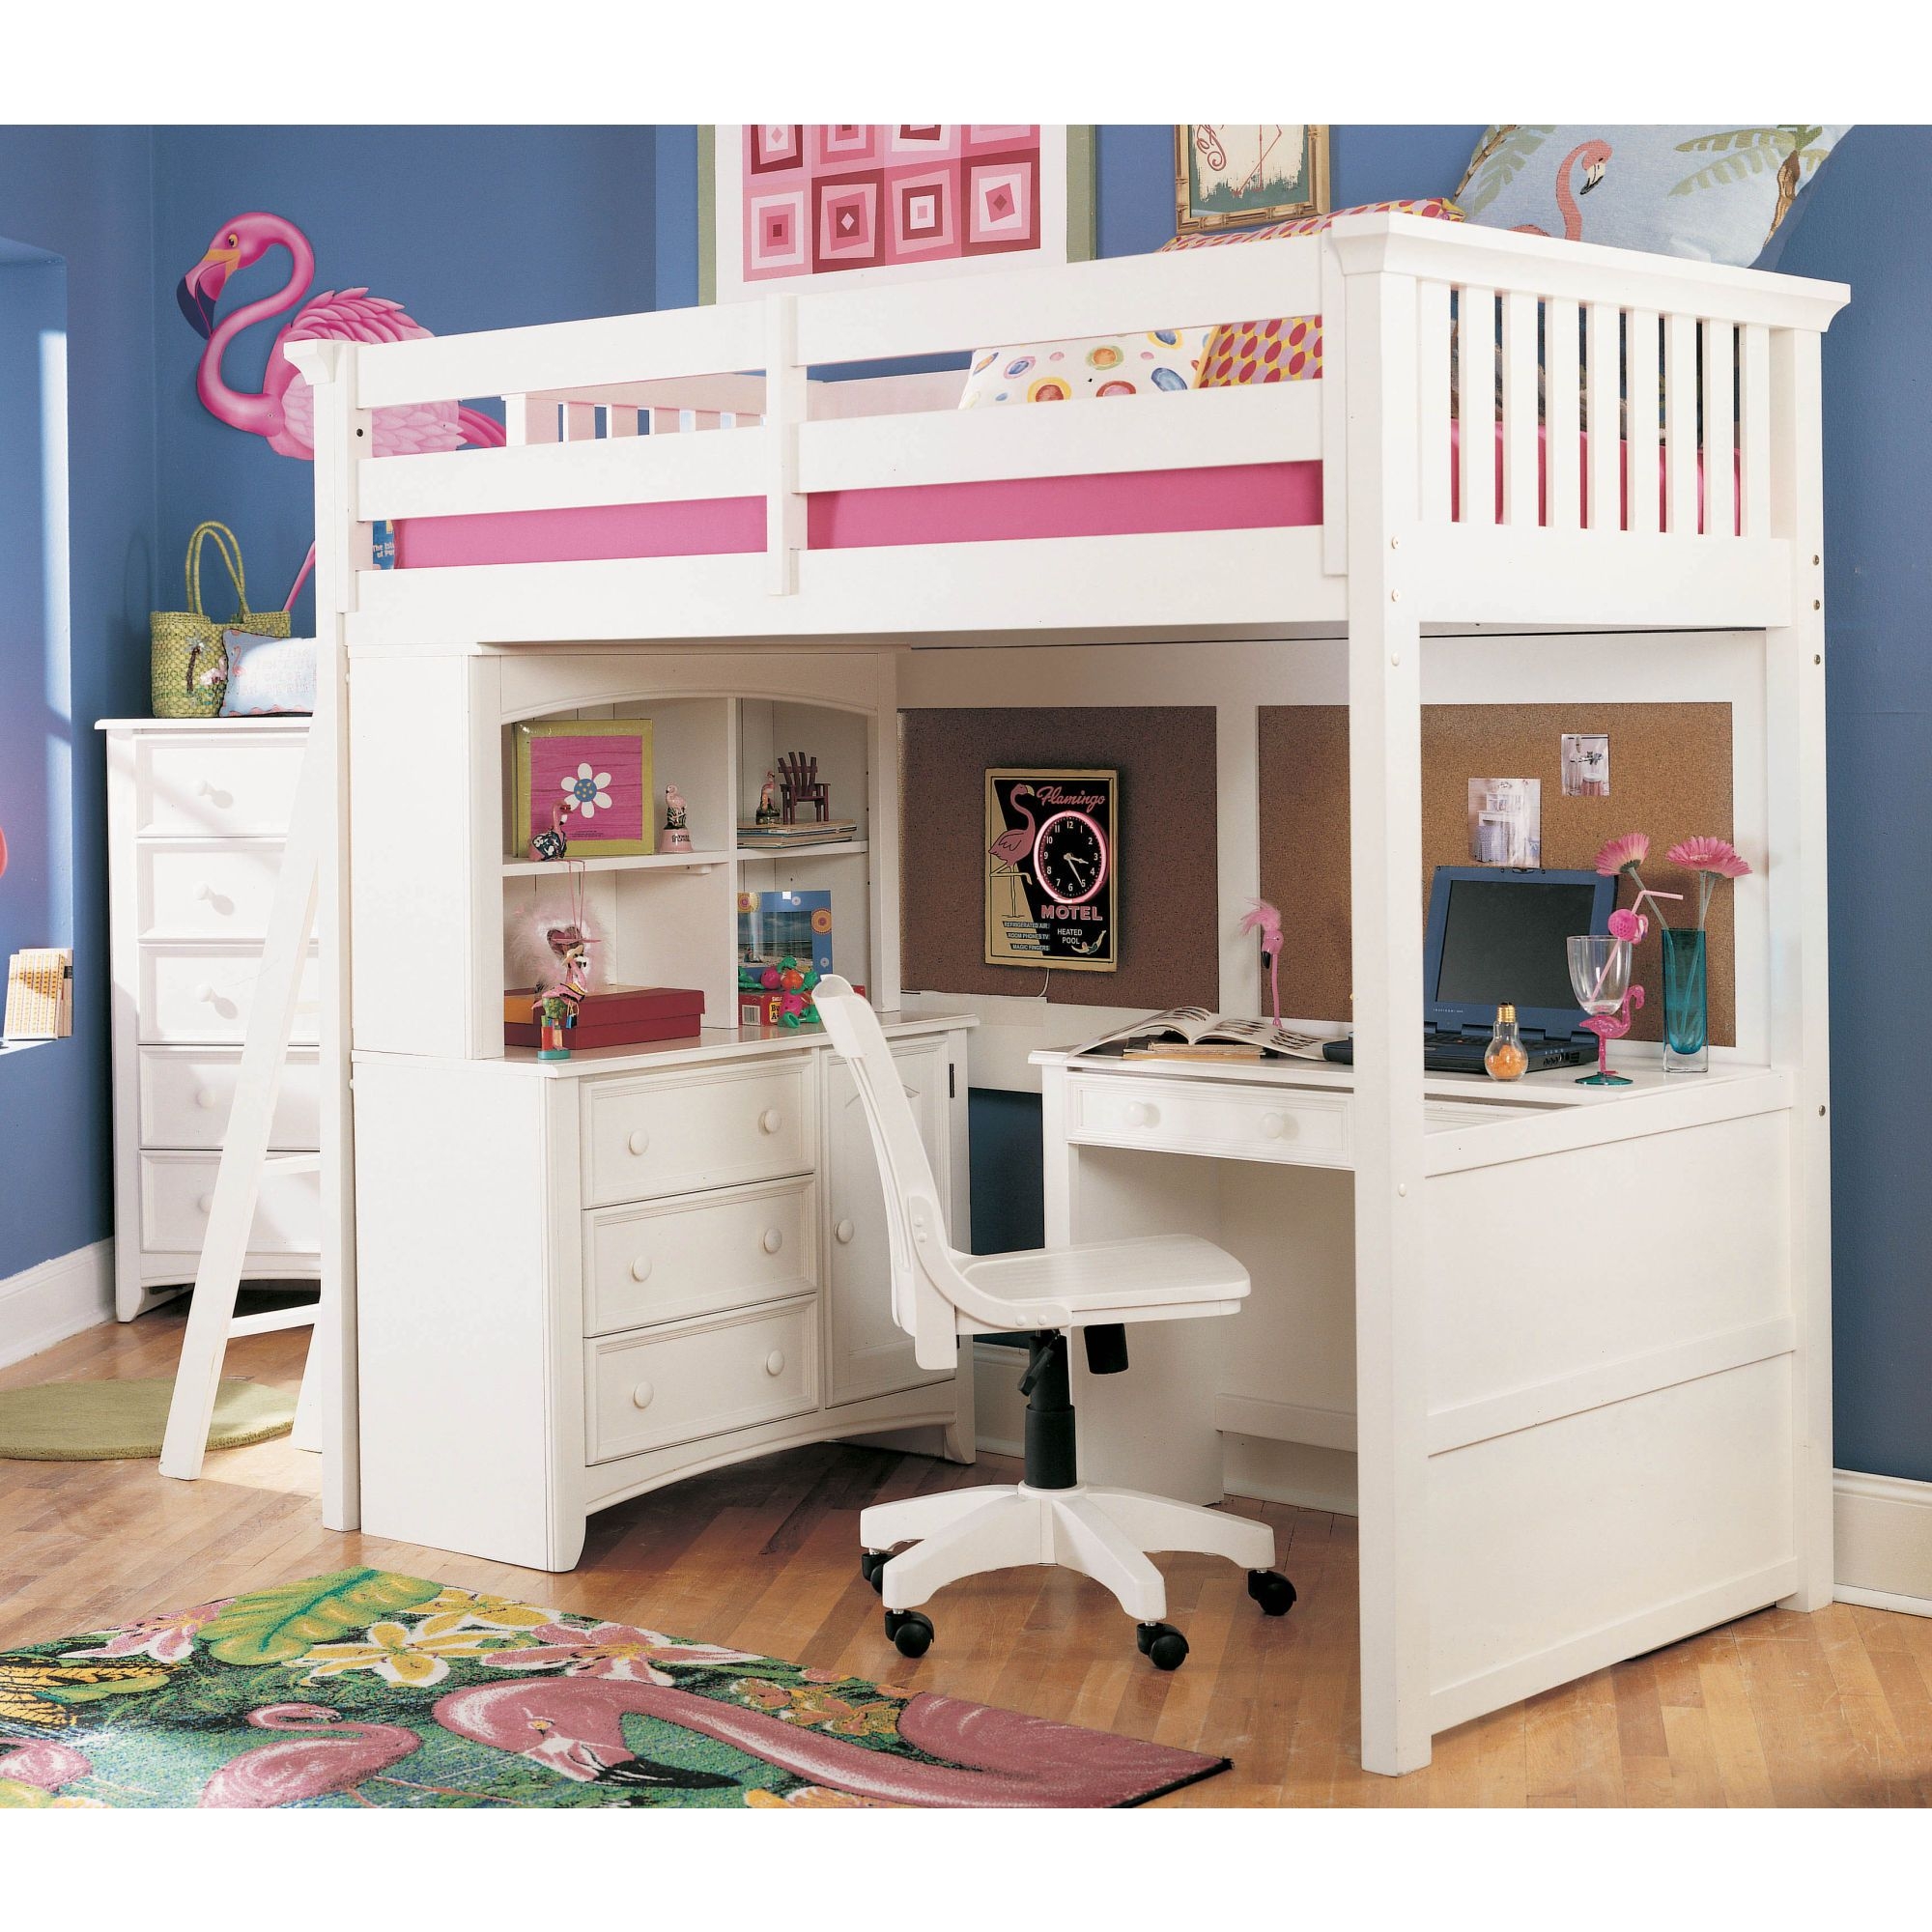 Lea getaway loft bed with matching furniture click to enlarge